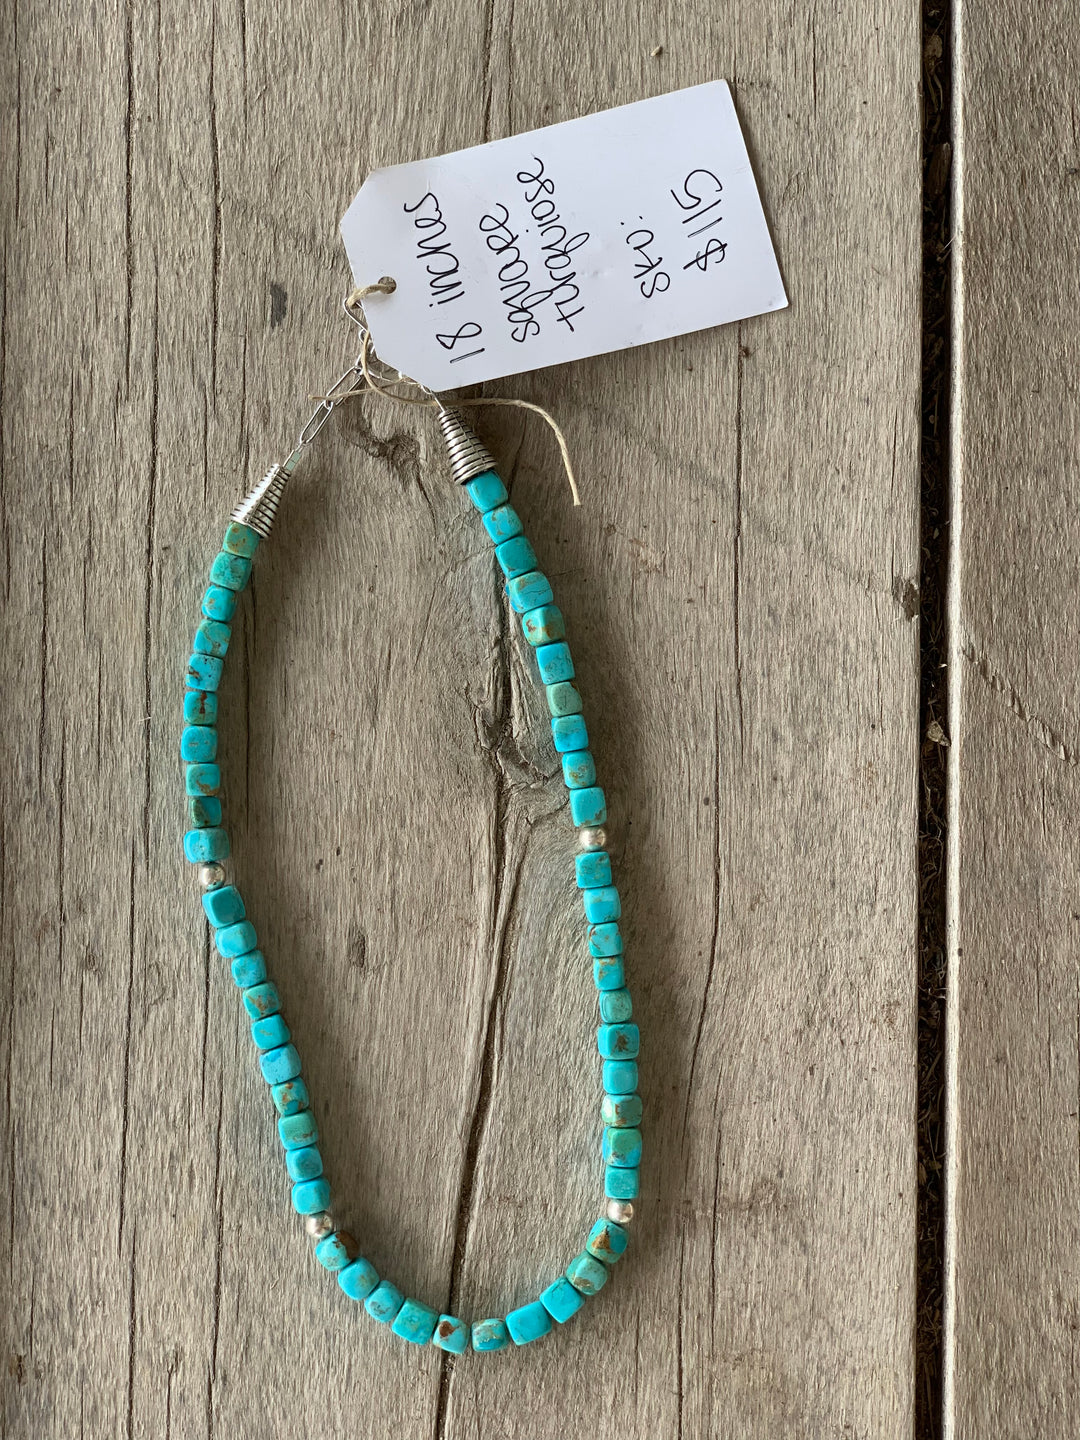 Rustic Rose Jewelry | 18” Square Turquoise Necklace